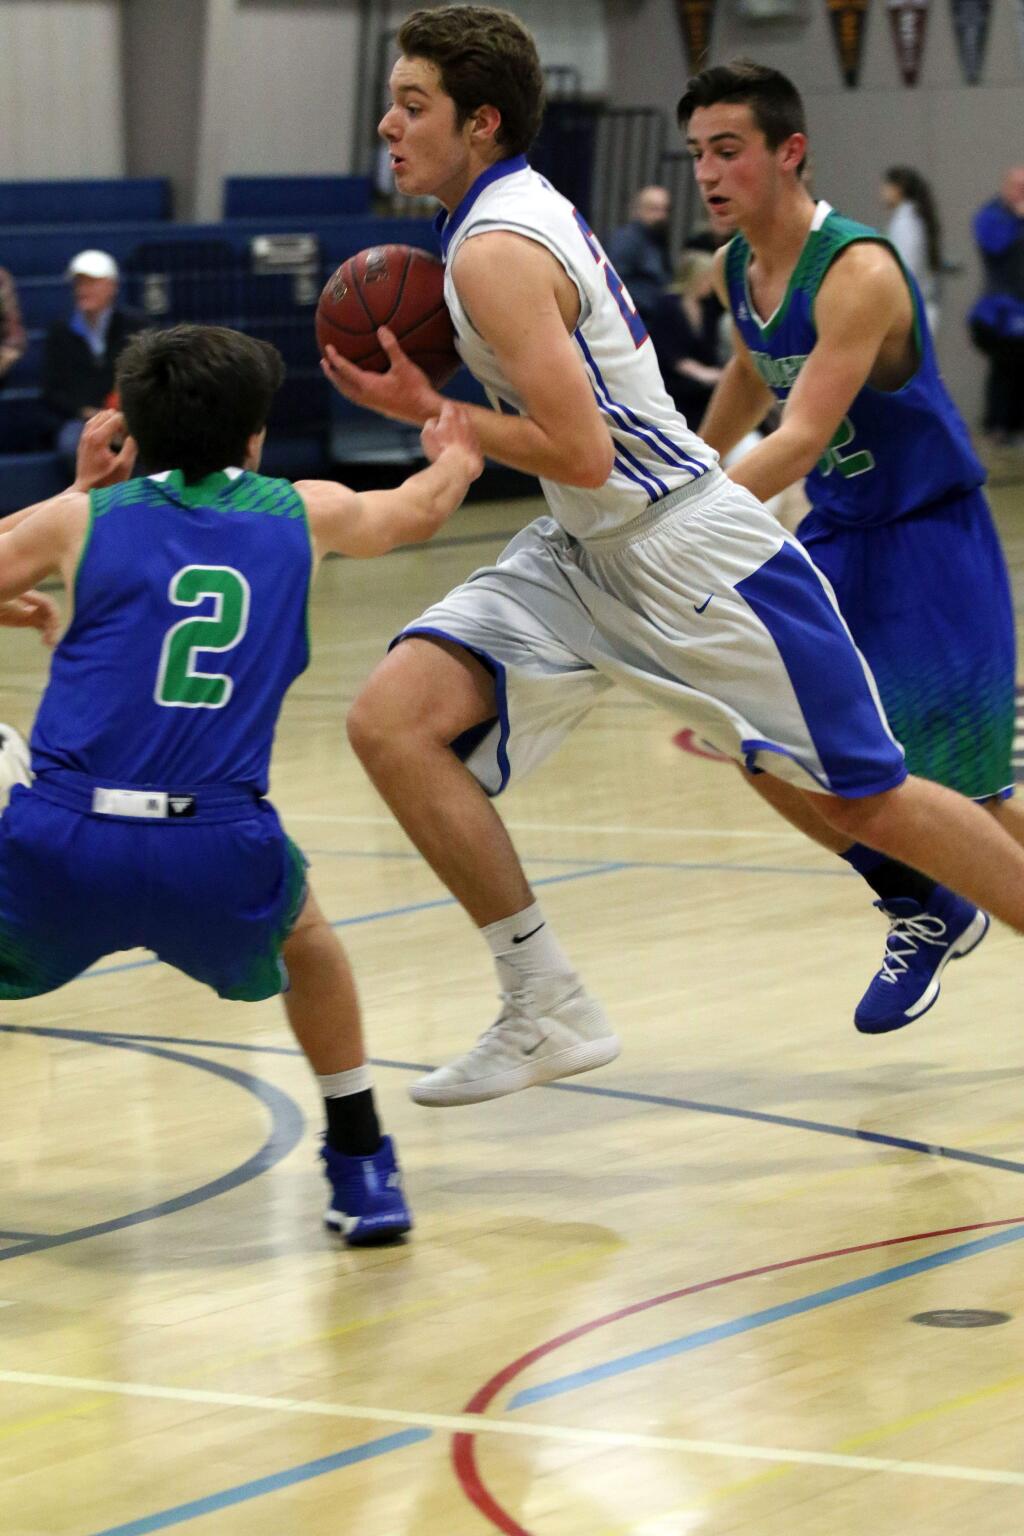 DWIGHT SUGIOKA/FOR THE ARGUS-COURIERSt. Vincent's Rory Morgan drives by San Domenico defenders during the Mustangs non-league match against the Panthers.